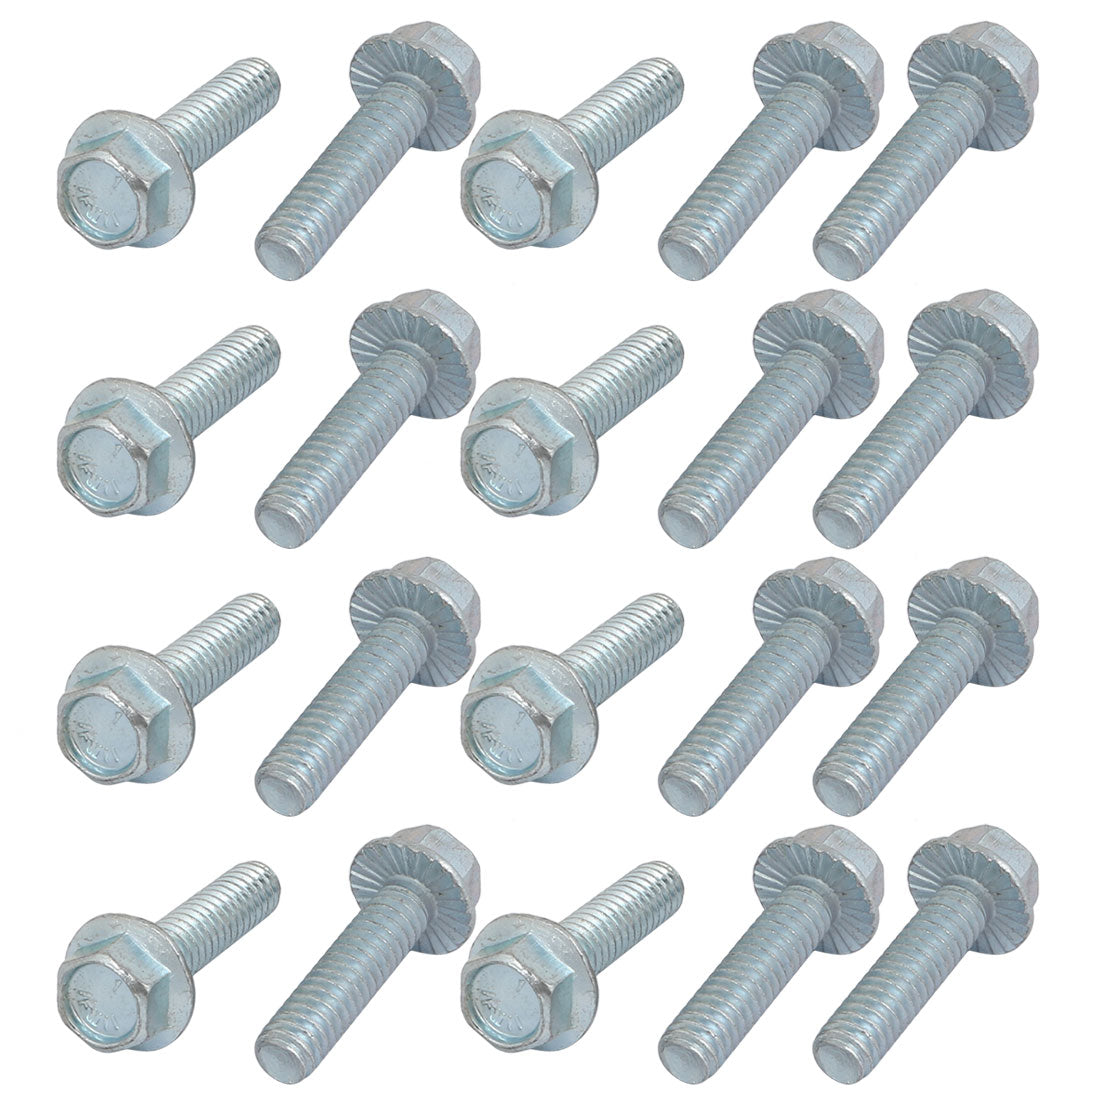 uxcell Uxcell 20Pcs 1/4-20 x 1 Inch Thread Carbon Steel Hex Serrated Head Flange Screw Bolt